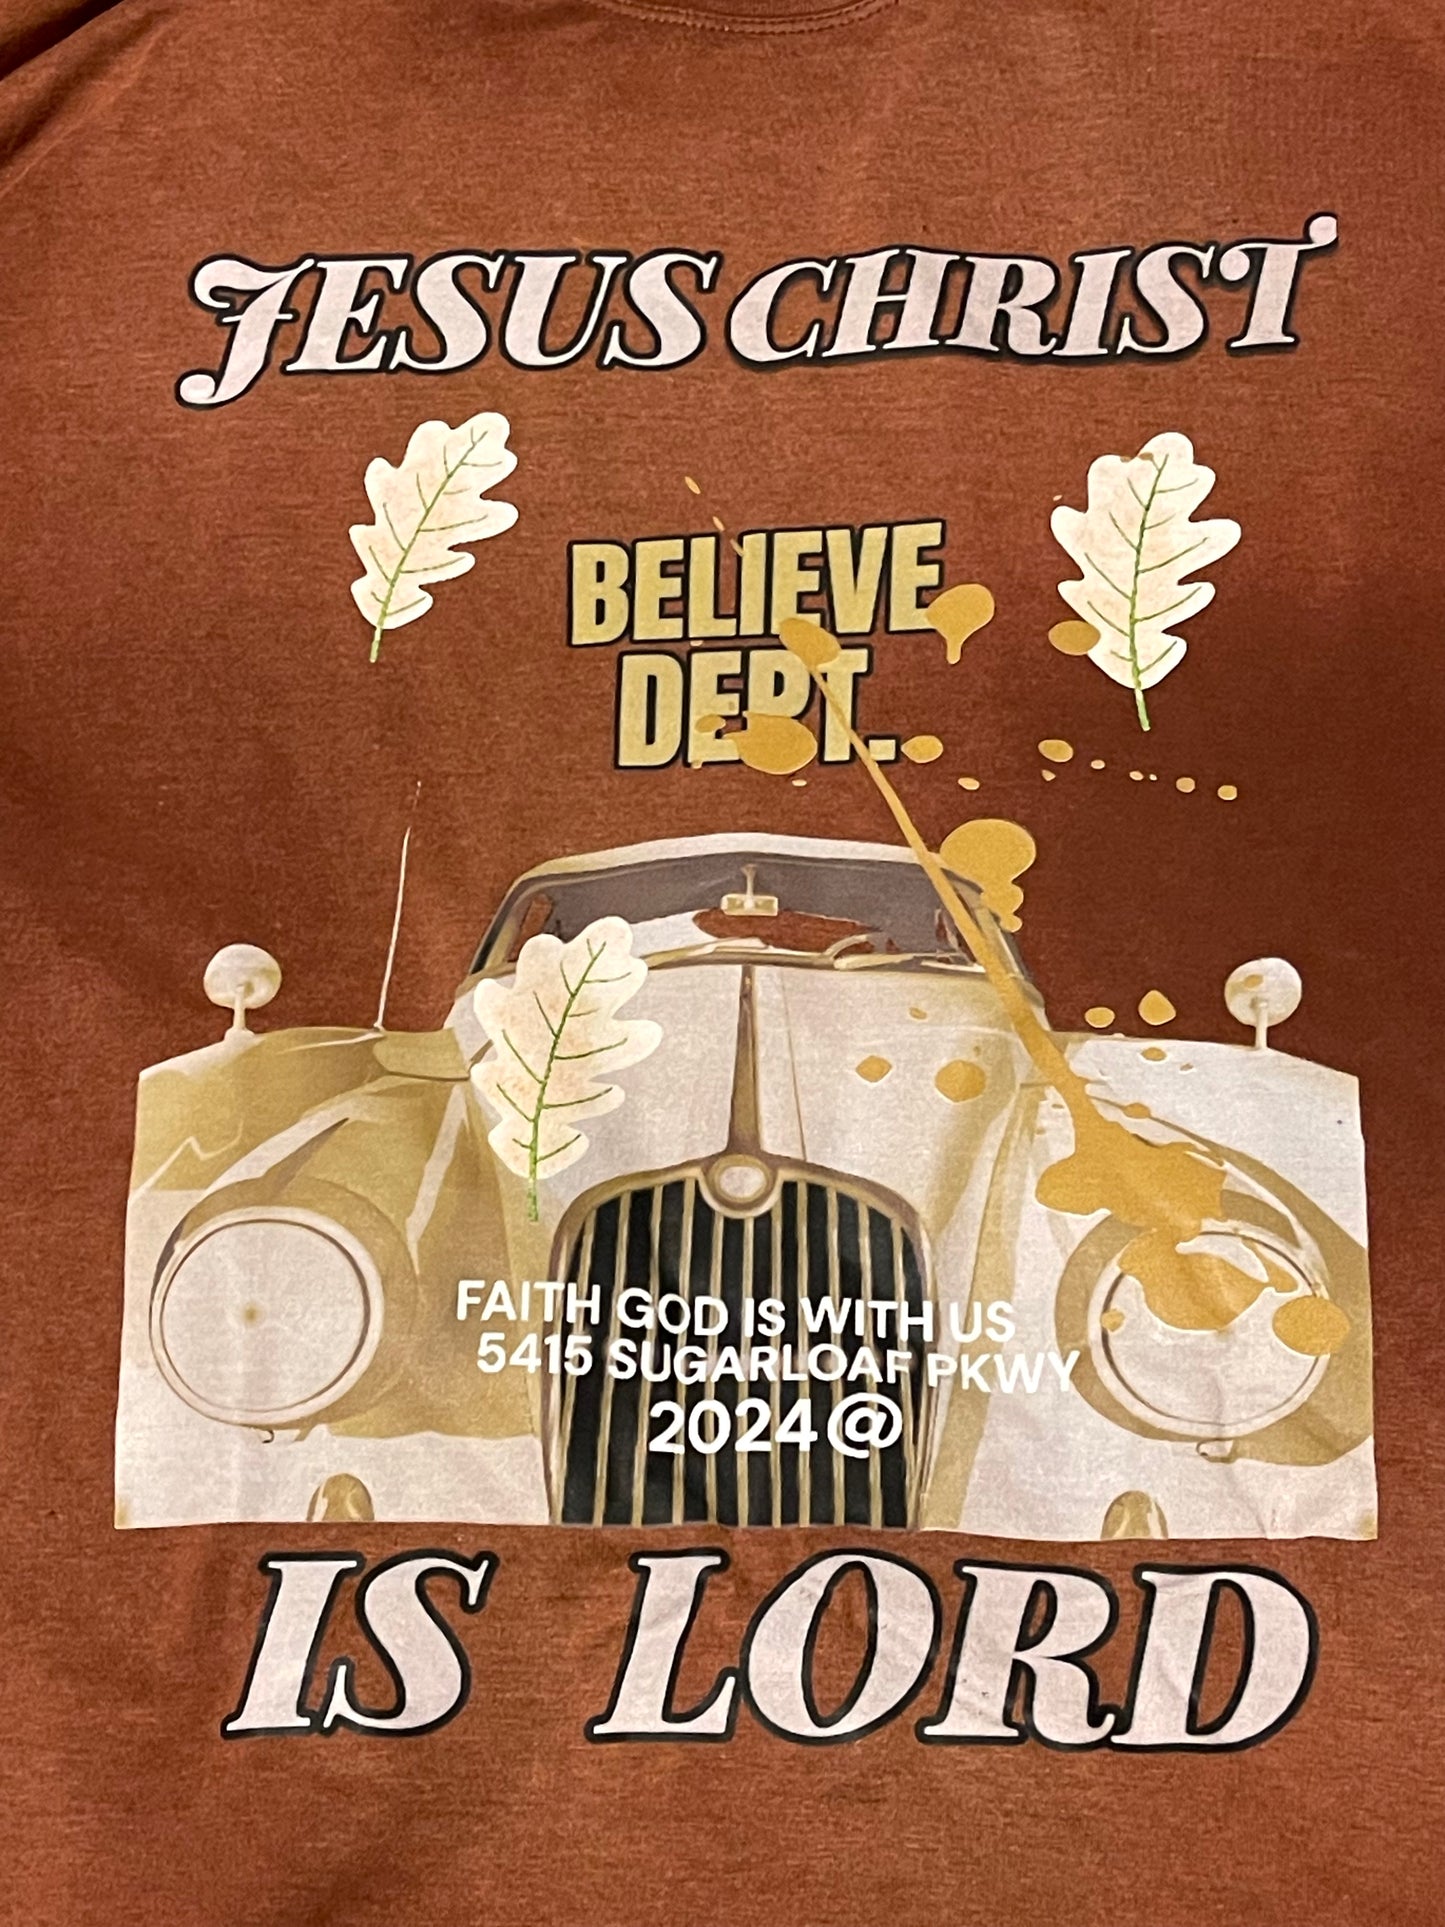 BELIEVE DEPT One of One Long Lasting Premium Cotton Size Large